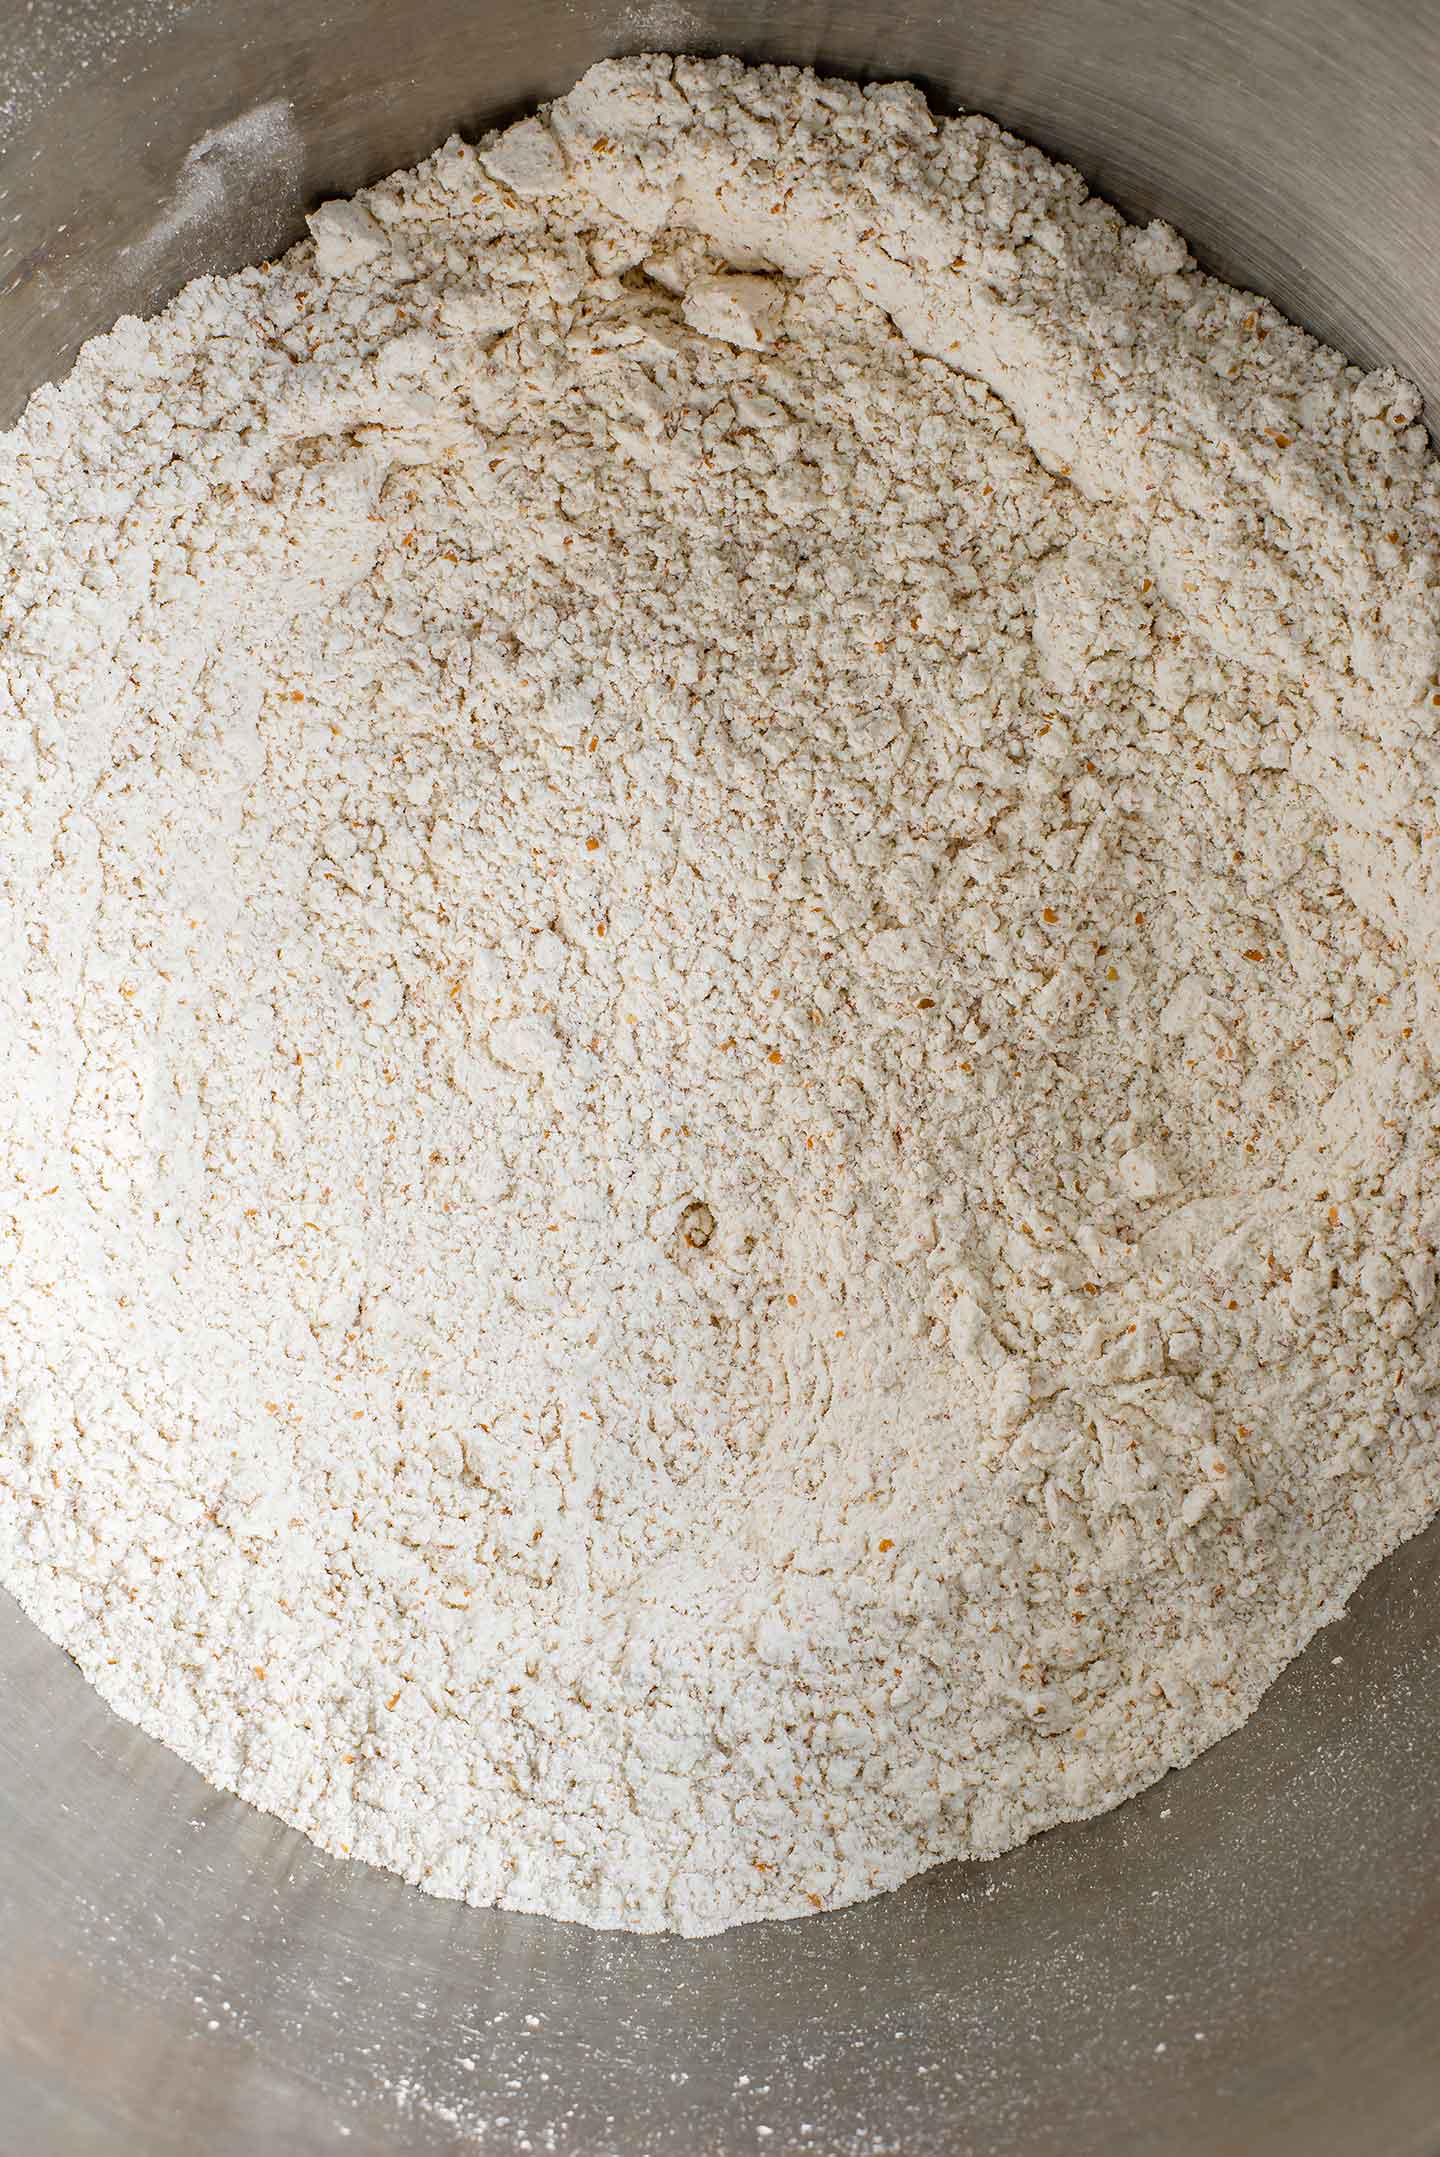 Top down view of whole wheat, white flour, and salt combined in a mixing bowl.